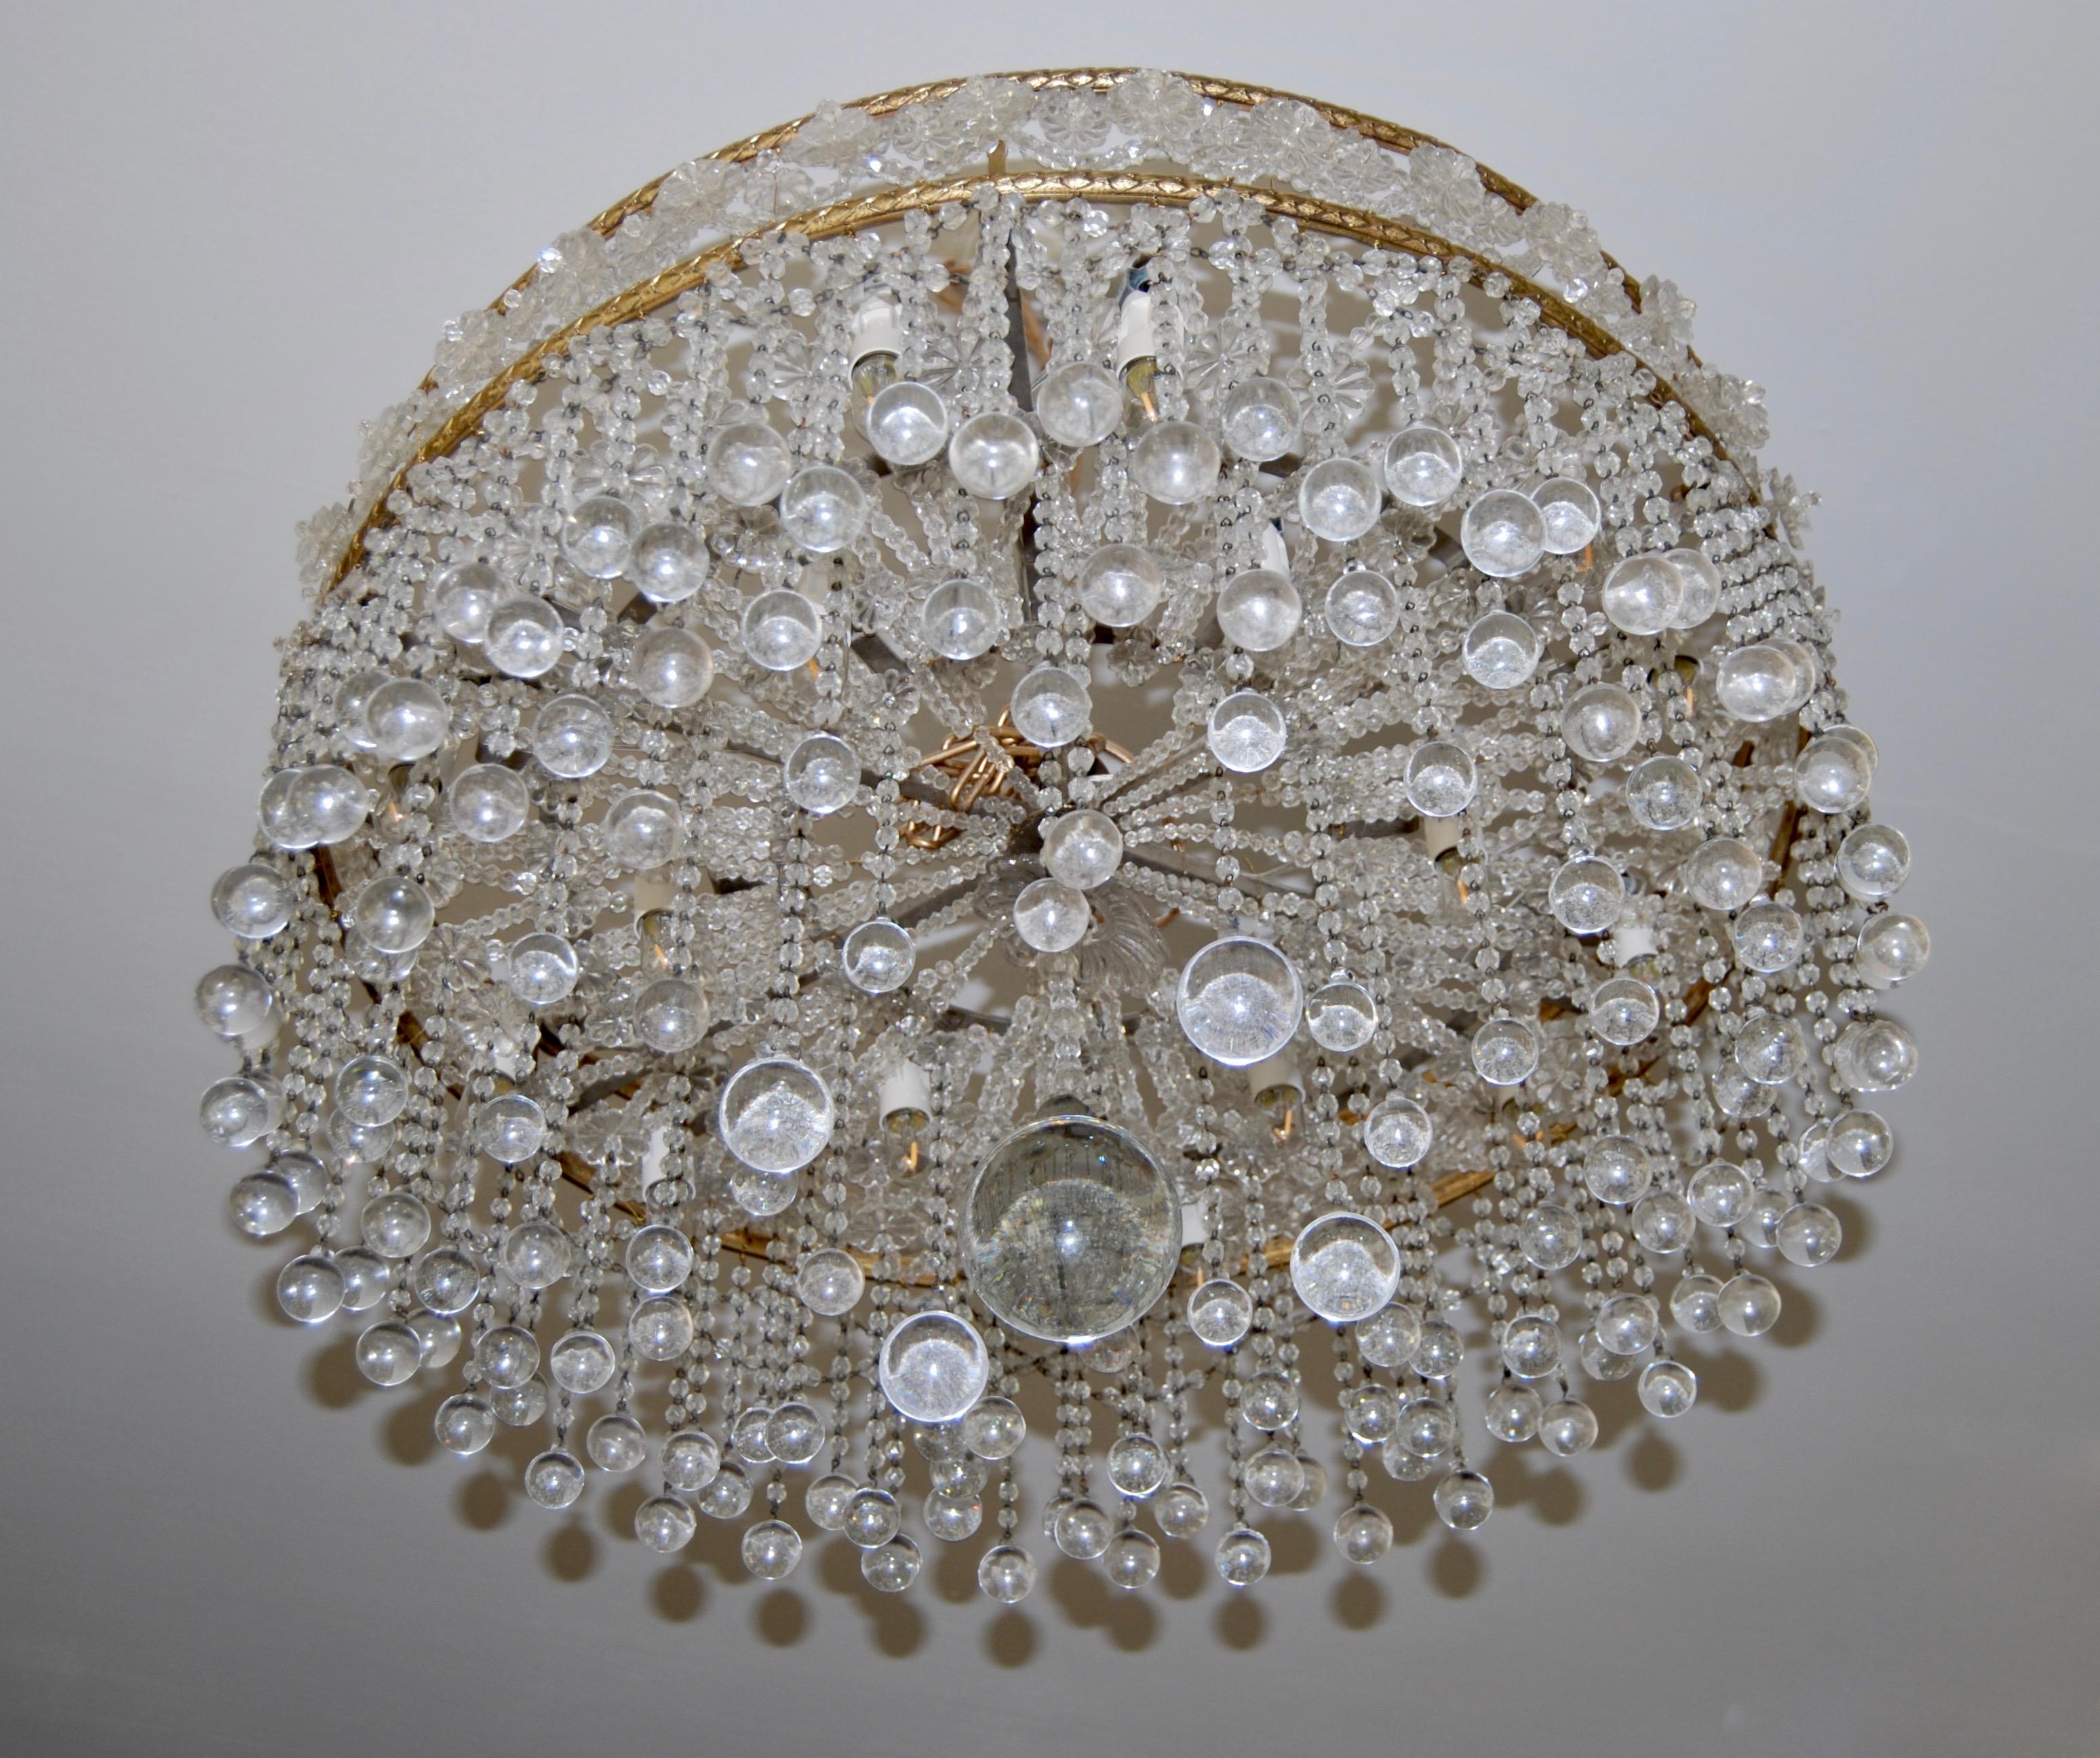 This spectacular chandelier has one large crystal ball as its centrepiece surrounded by 4 slightly smaller balls, then a series of others, smaller again, continue out to the edge
Crystal beaded chains hold them from two gilt bronze rings which are